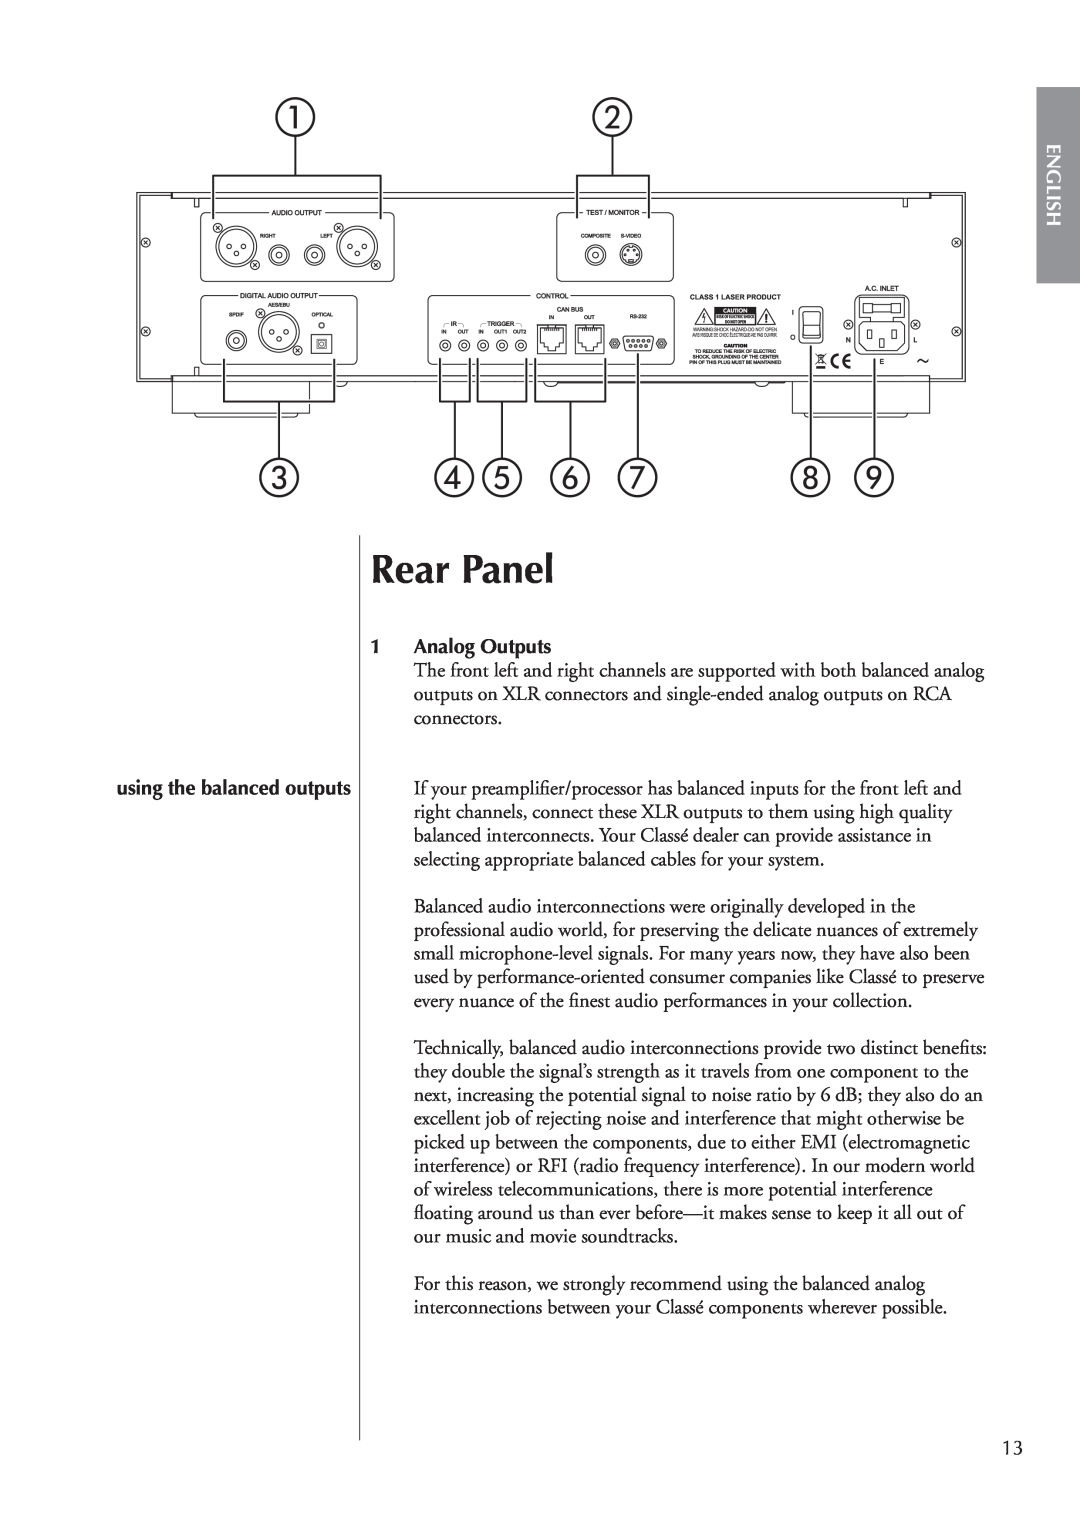 Classe Audio CDP-202 owner manual Rear Panel, English, Analog Outputs, using the balanced outputs 